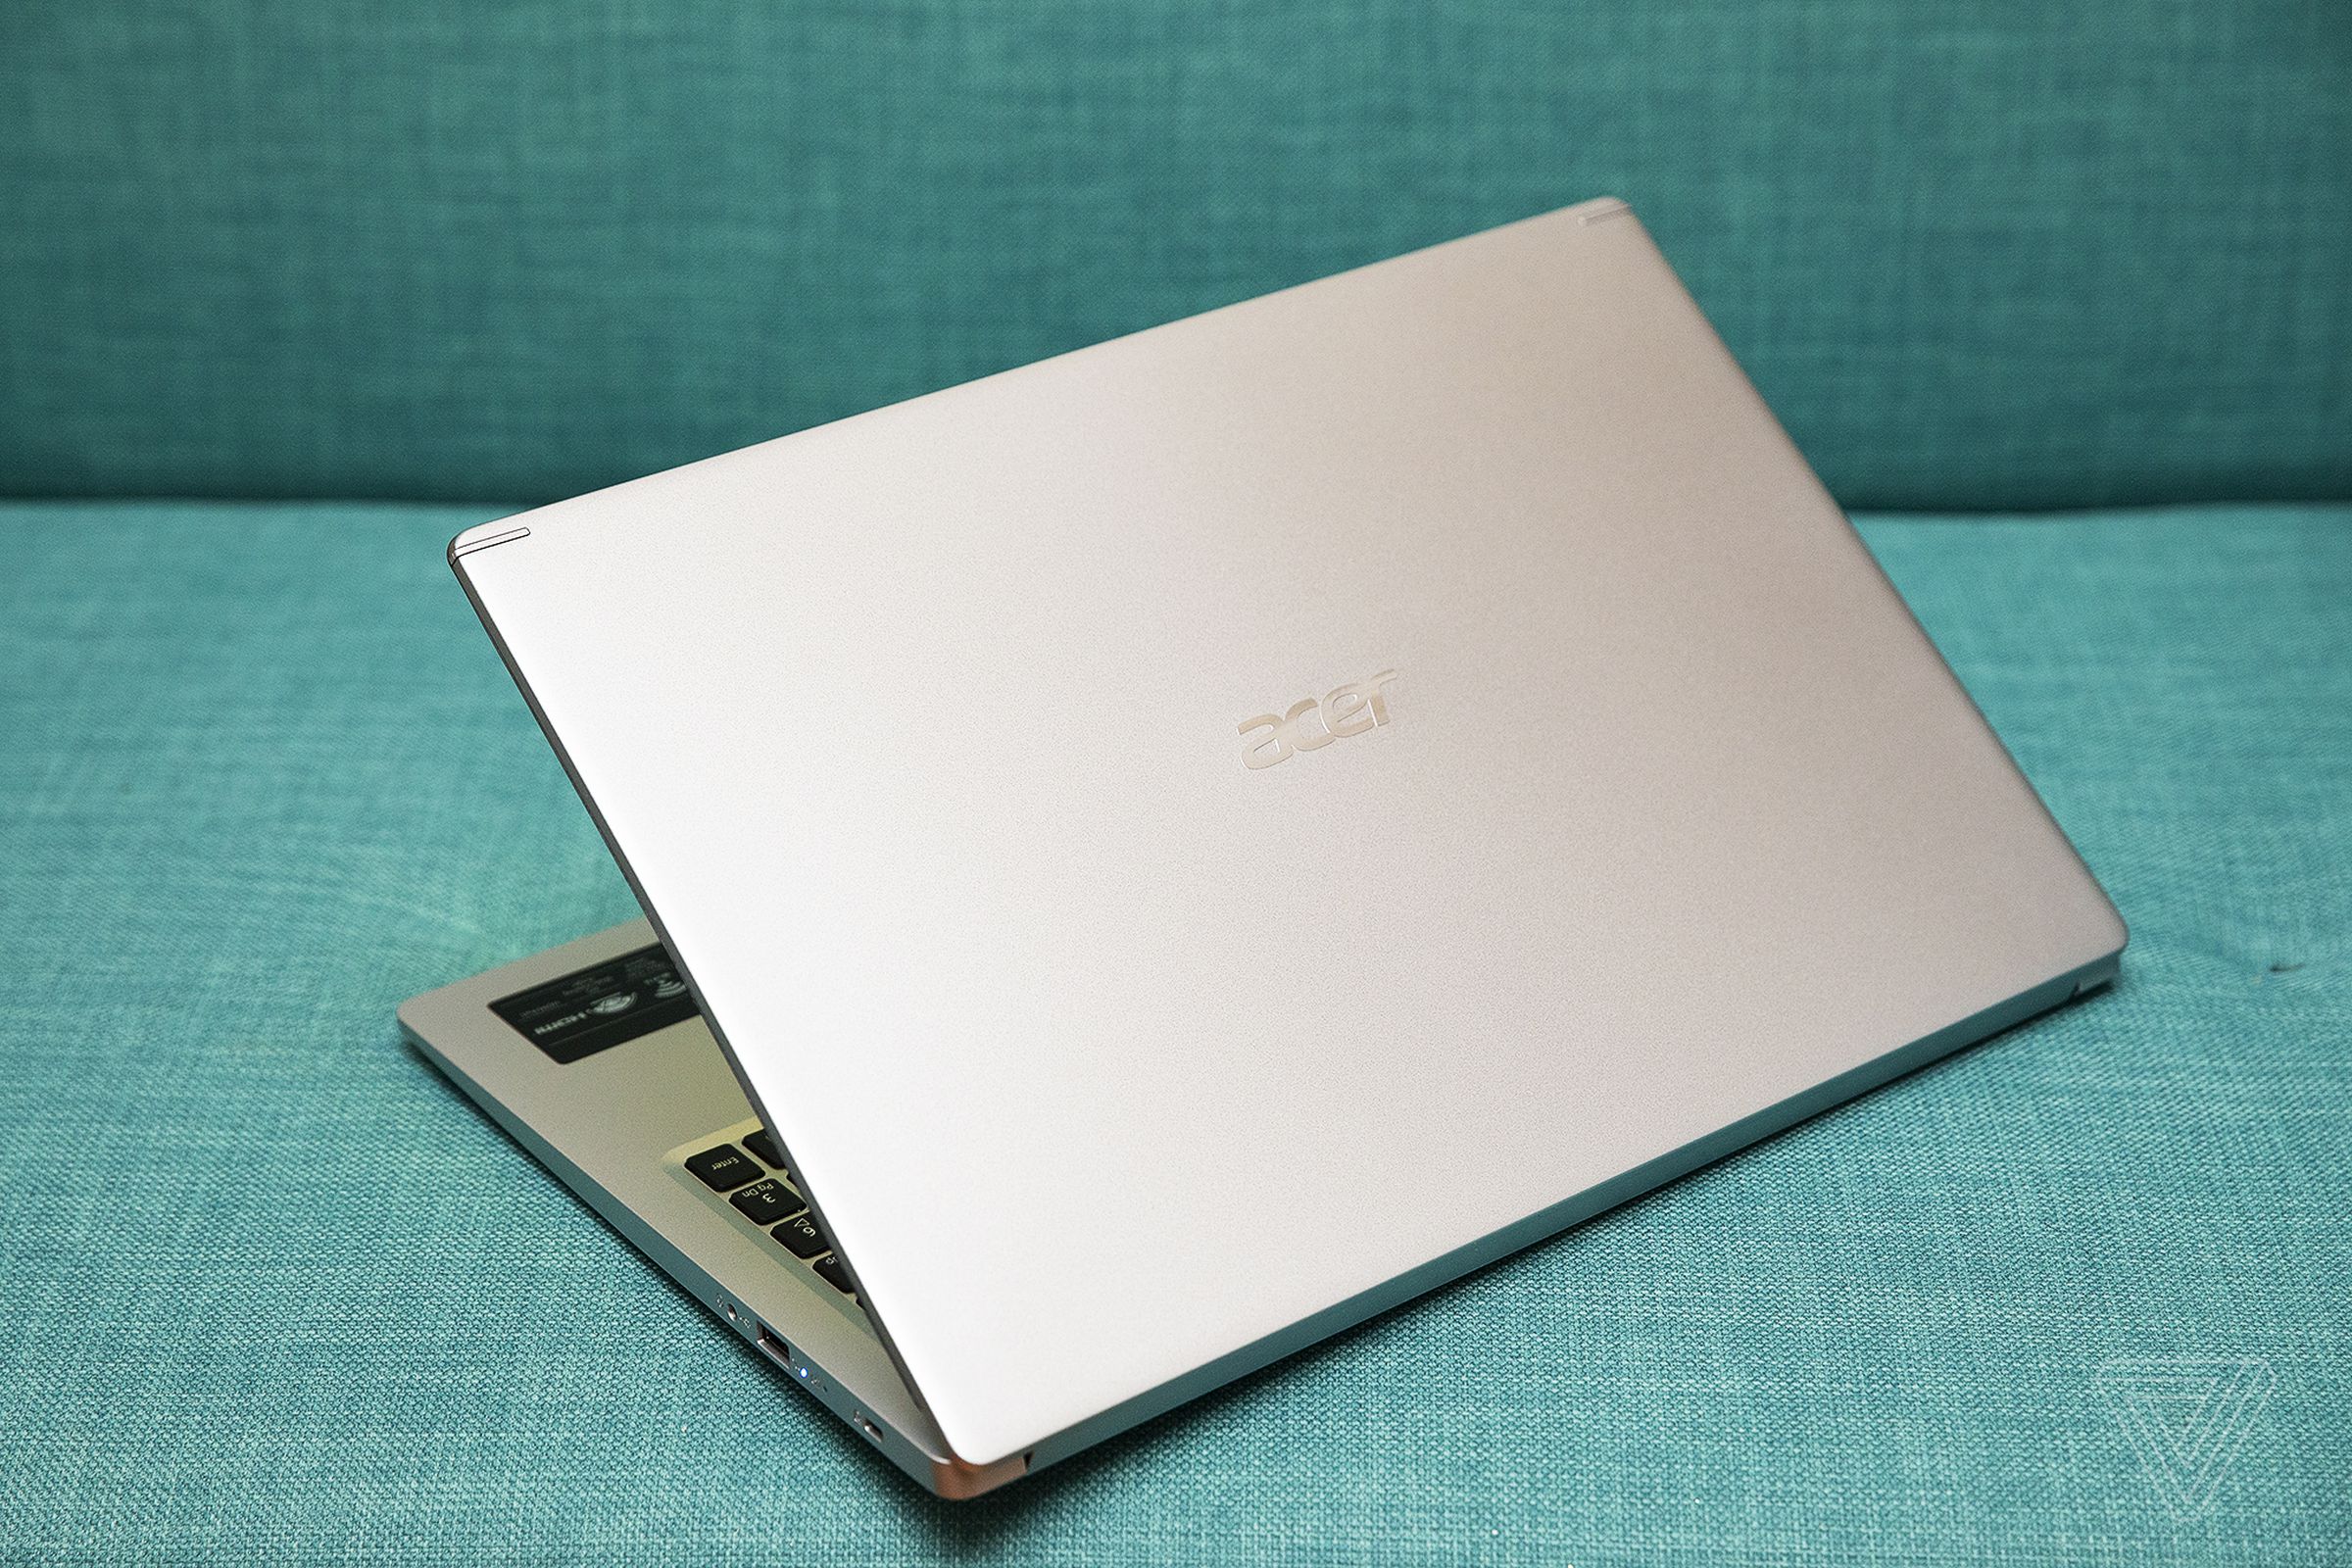 The Acer Aspire 5 from the back, half open.